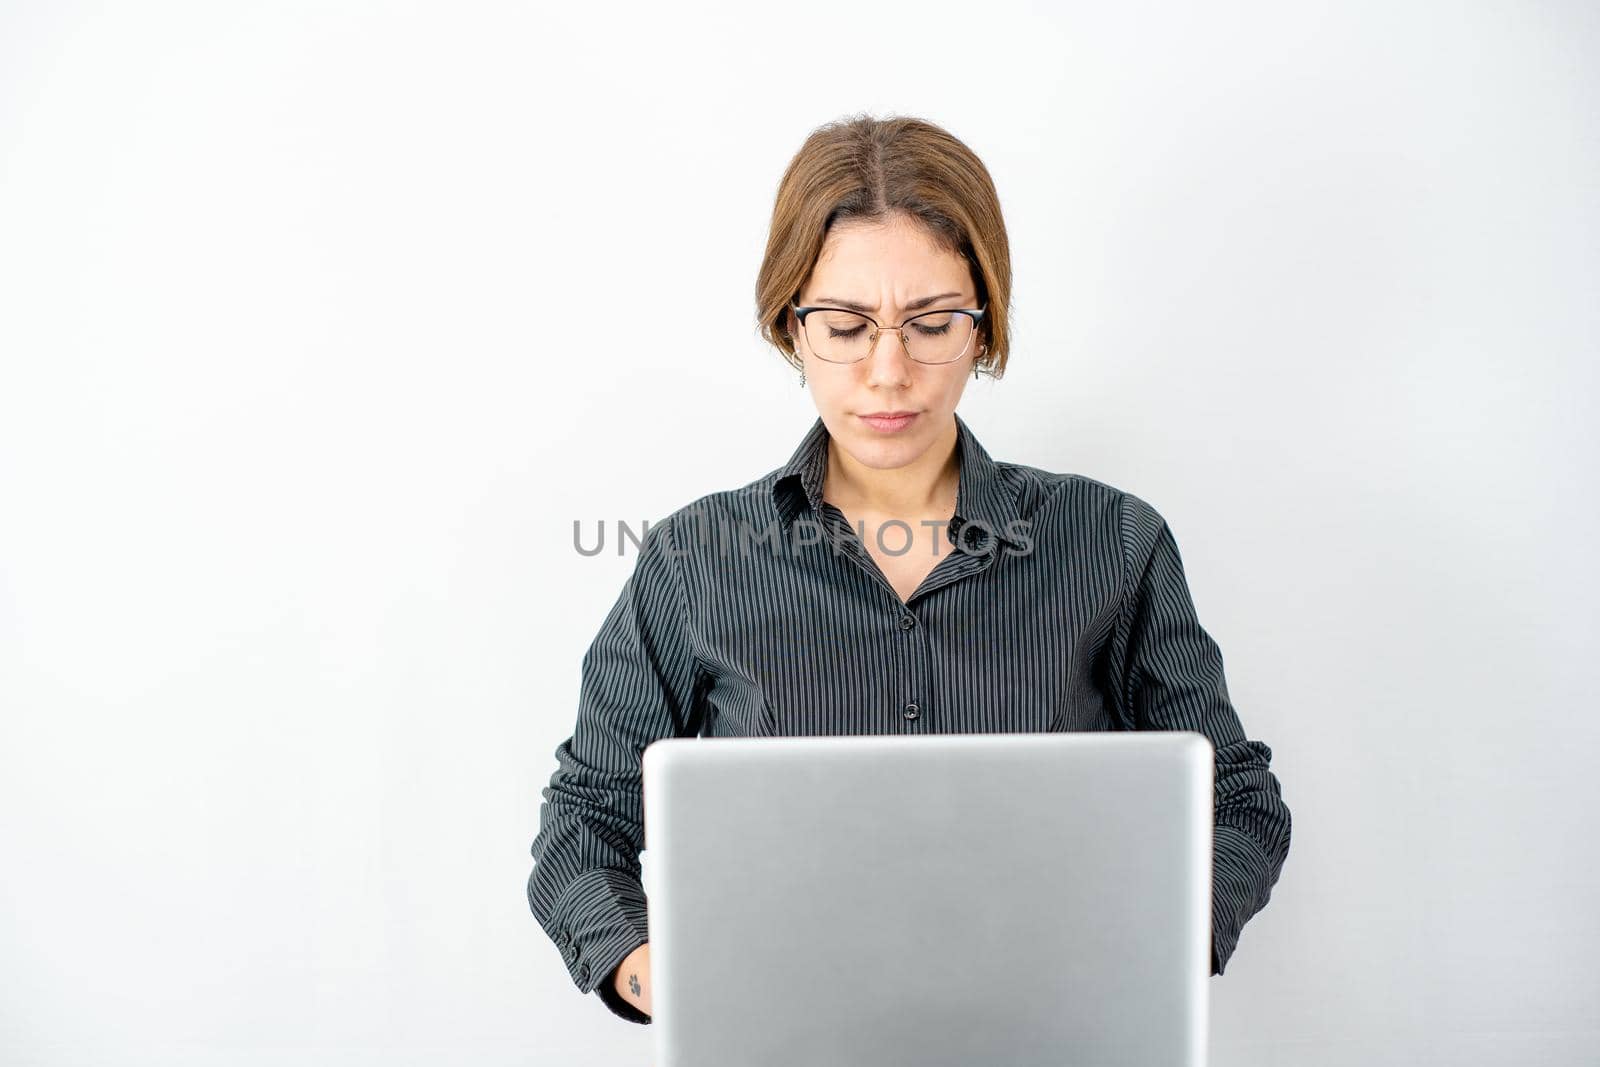 Business woman with dark shirt and glasses concentrated on computer work looks at the screen wearing work clothes isolated on copy space white background. Women in technological and communication jobs